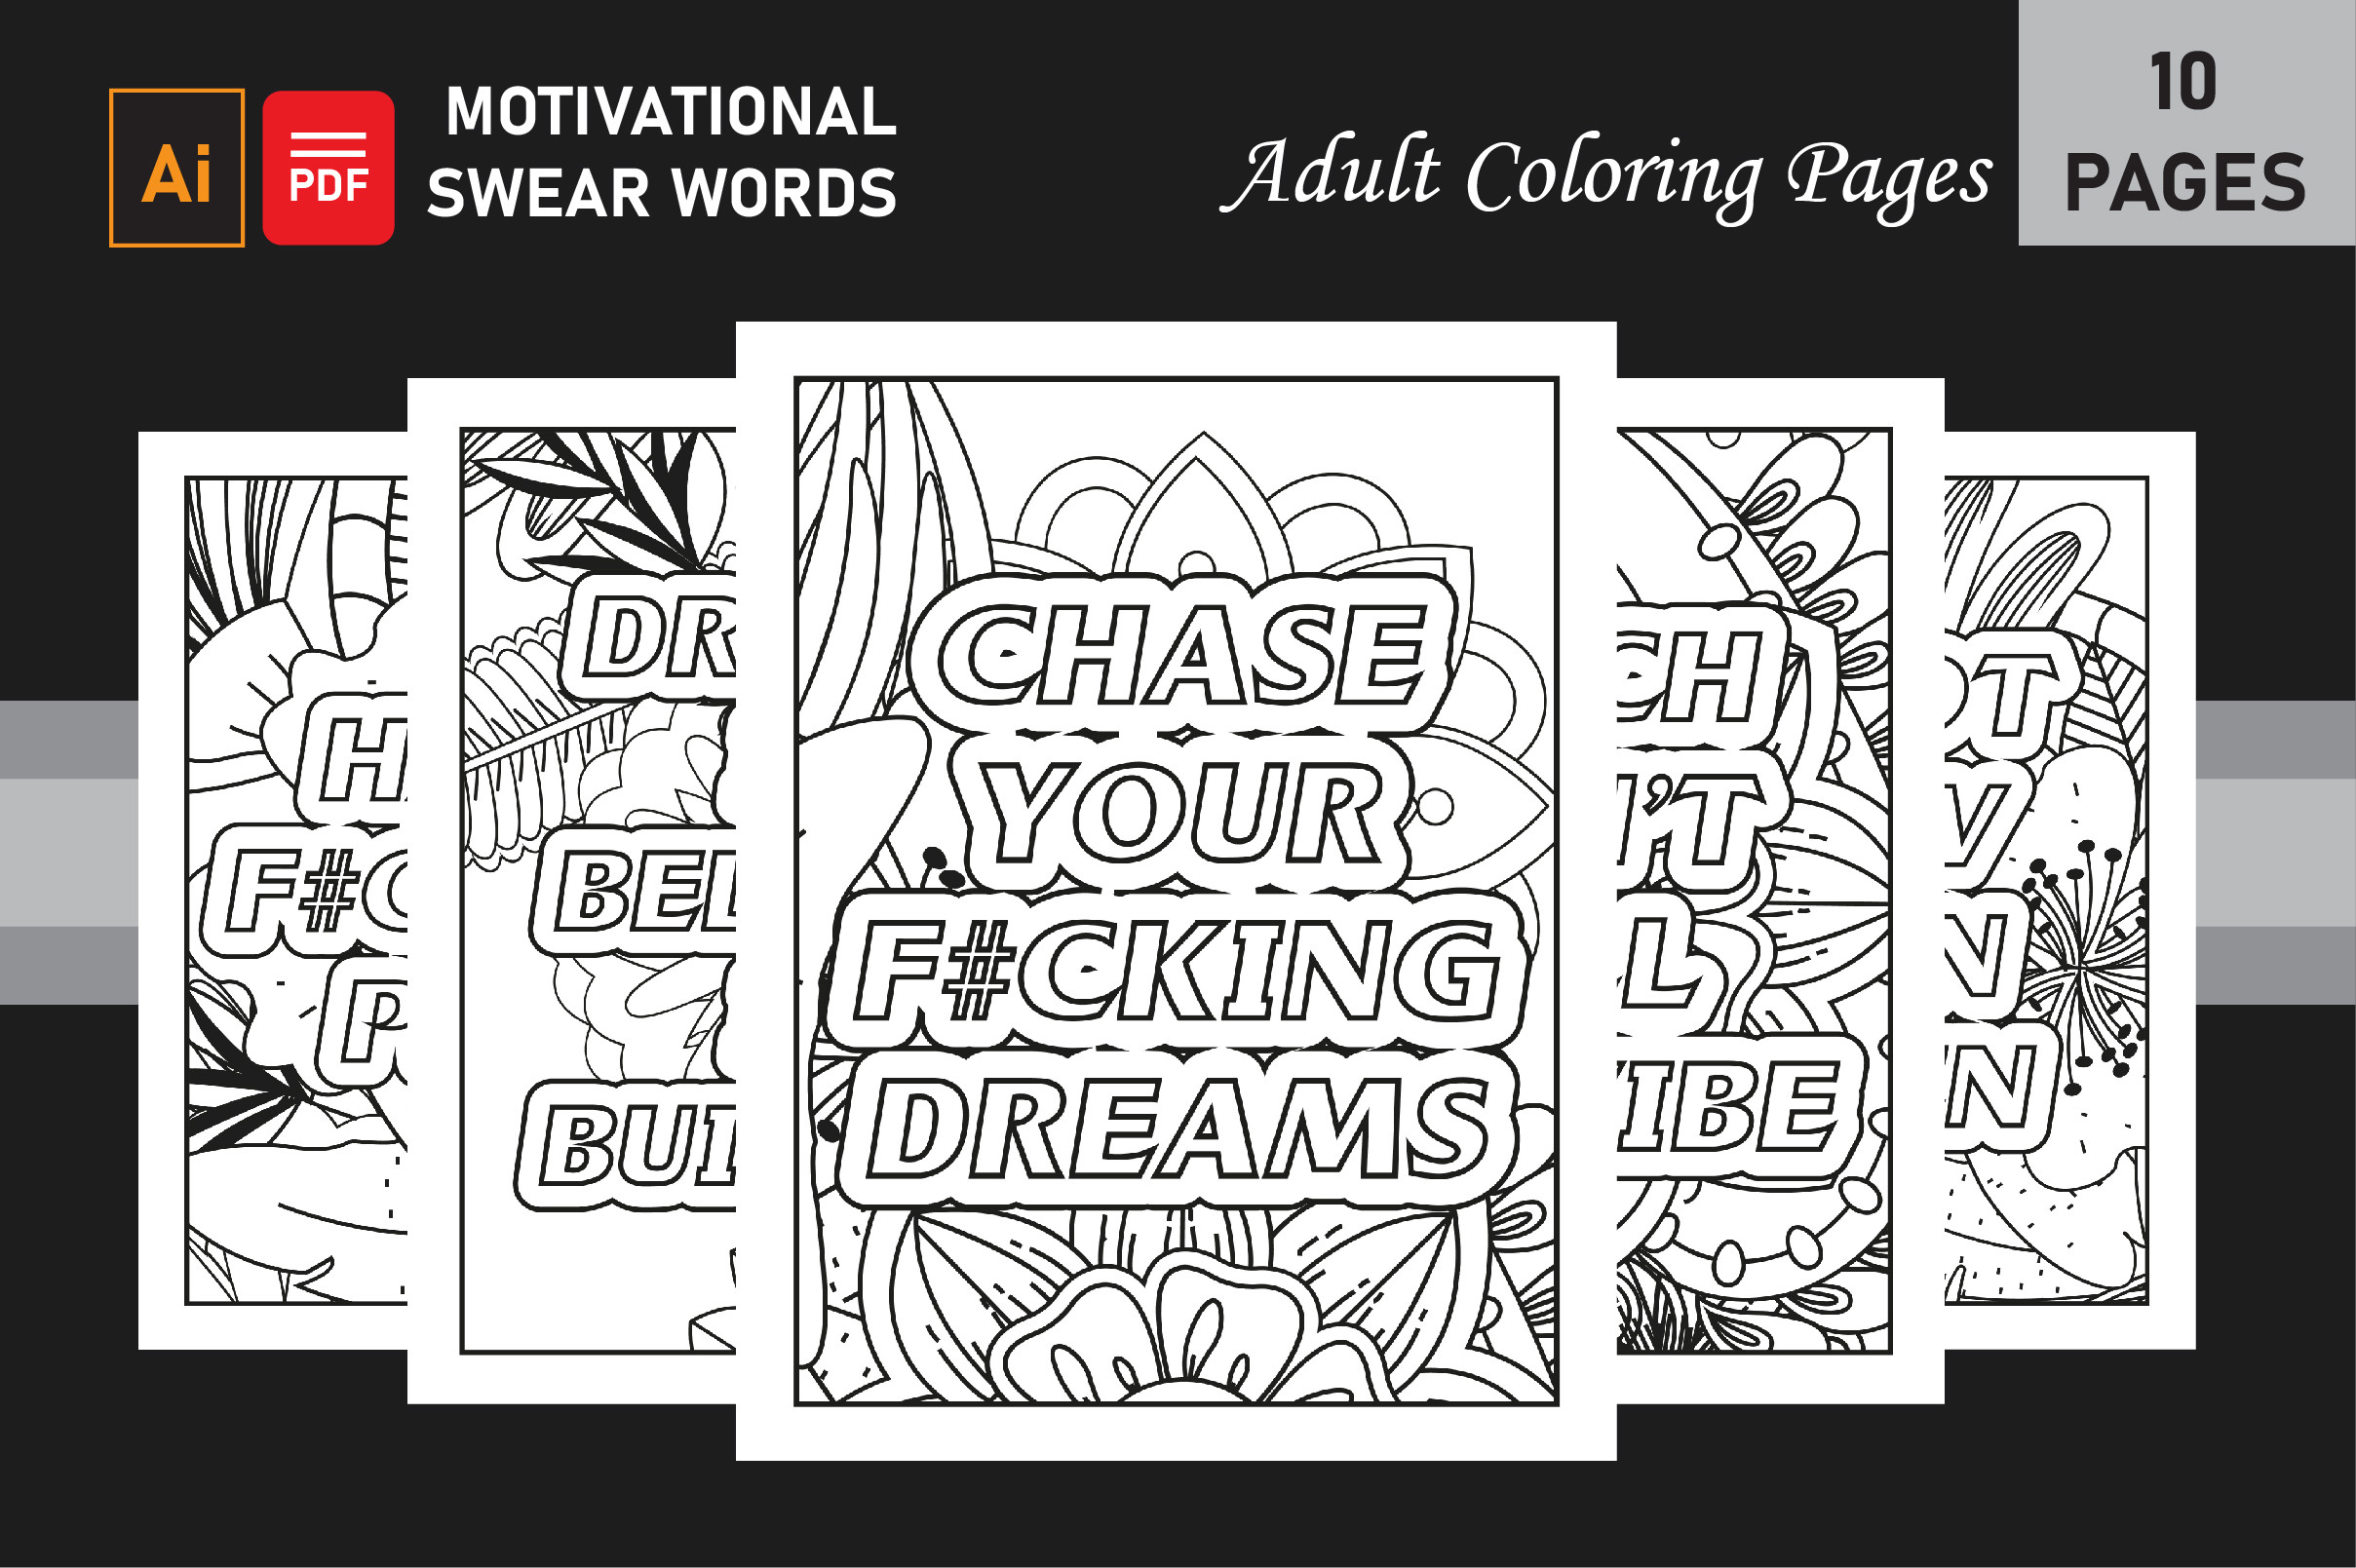 Motivational Swear Words Coloring Pages For Adults Graphic By Azzziz · Creative Fabrica 